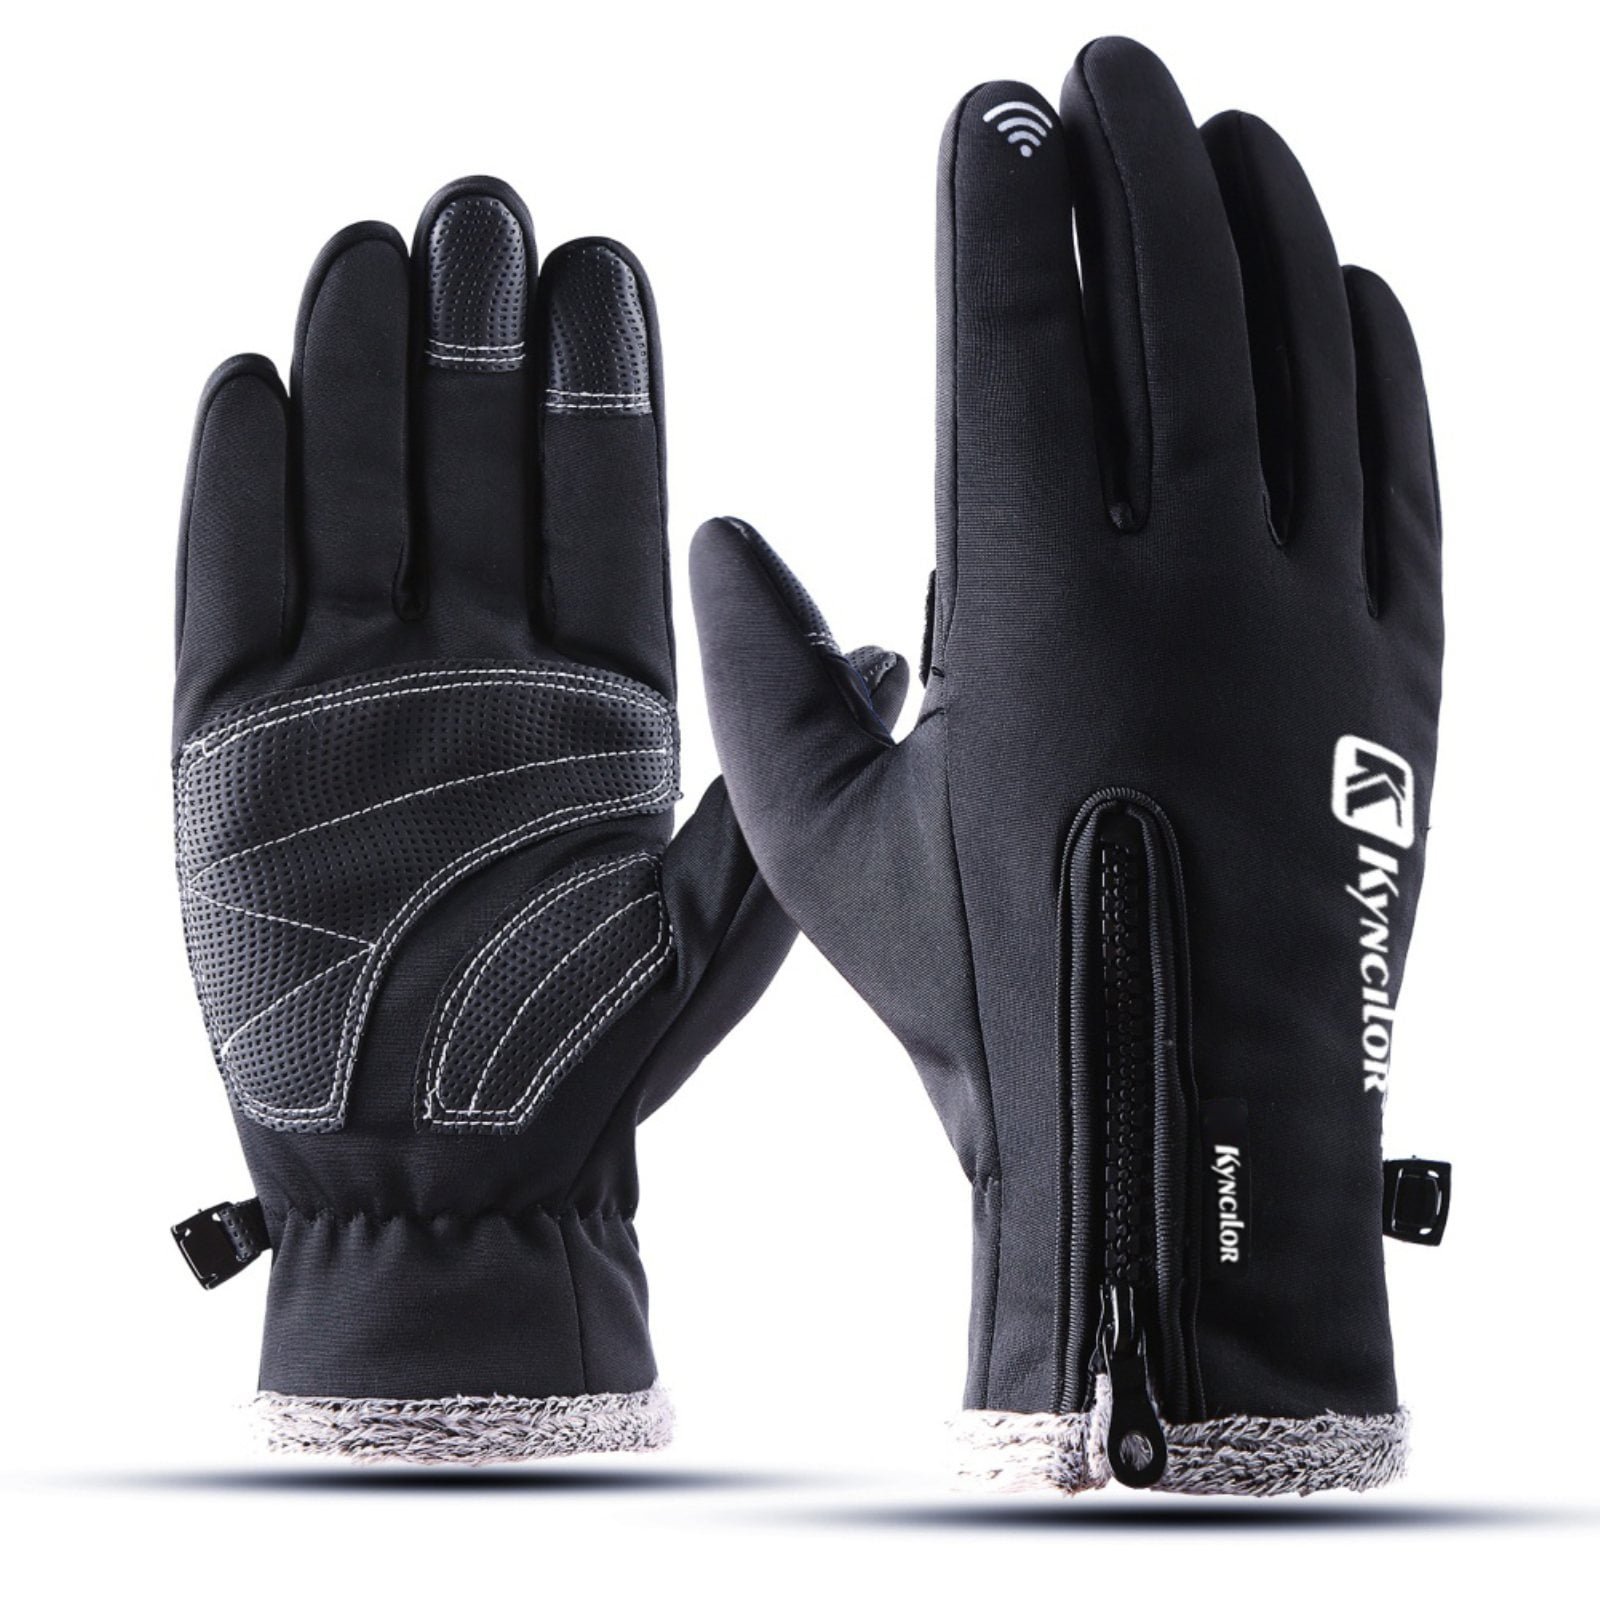 Ski Gloves Winter Waterproof Thick Warm Cycling Touch Screen Riding Mittens 